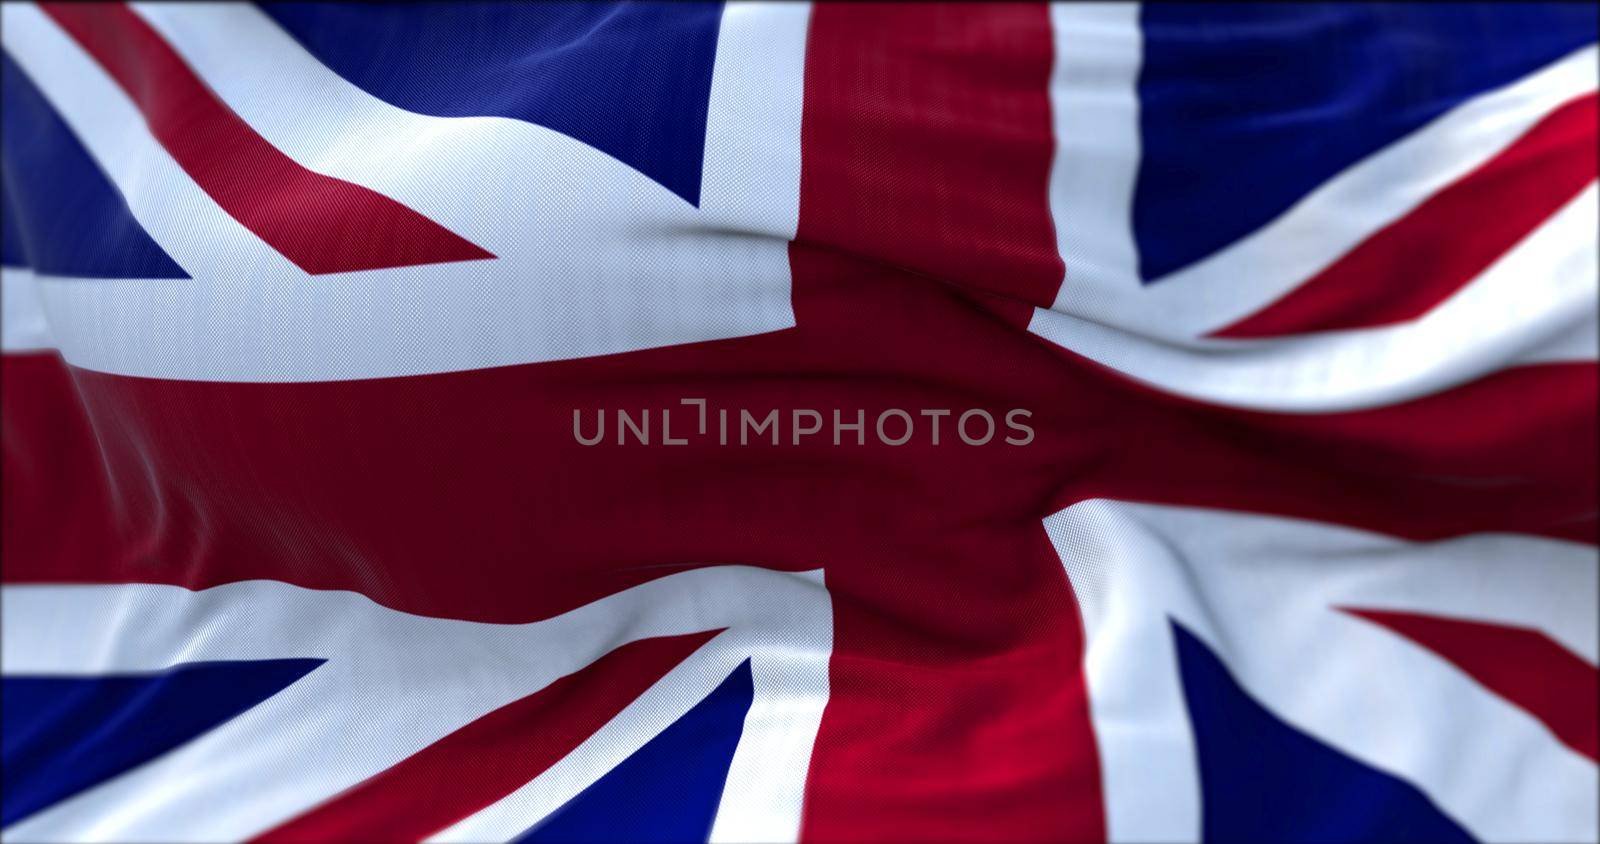 close up view of the United Kingdom flag waving in the wind. Selective focus.